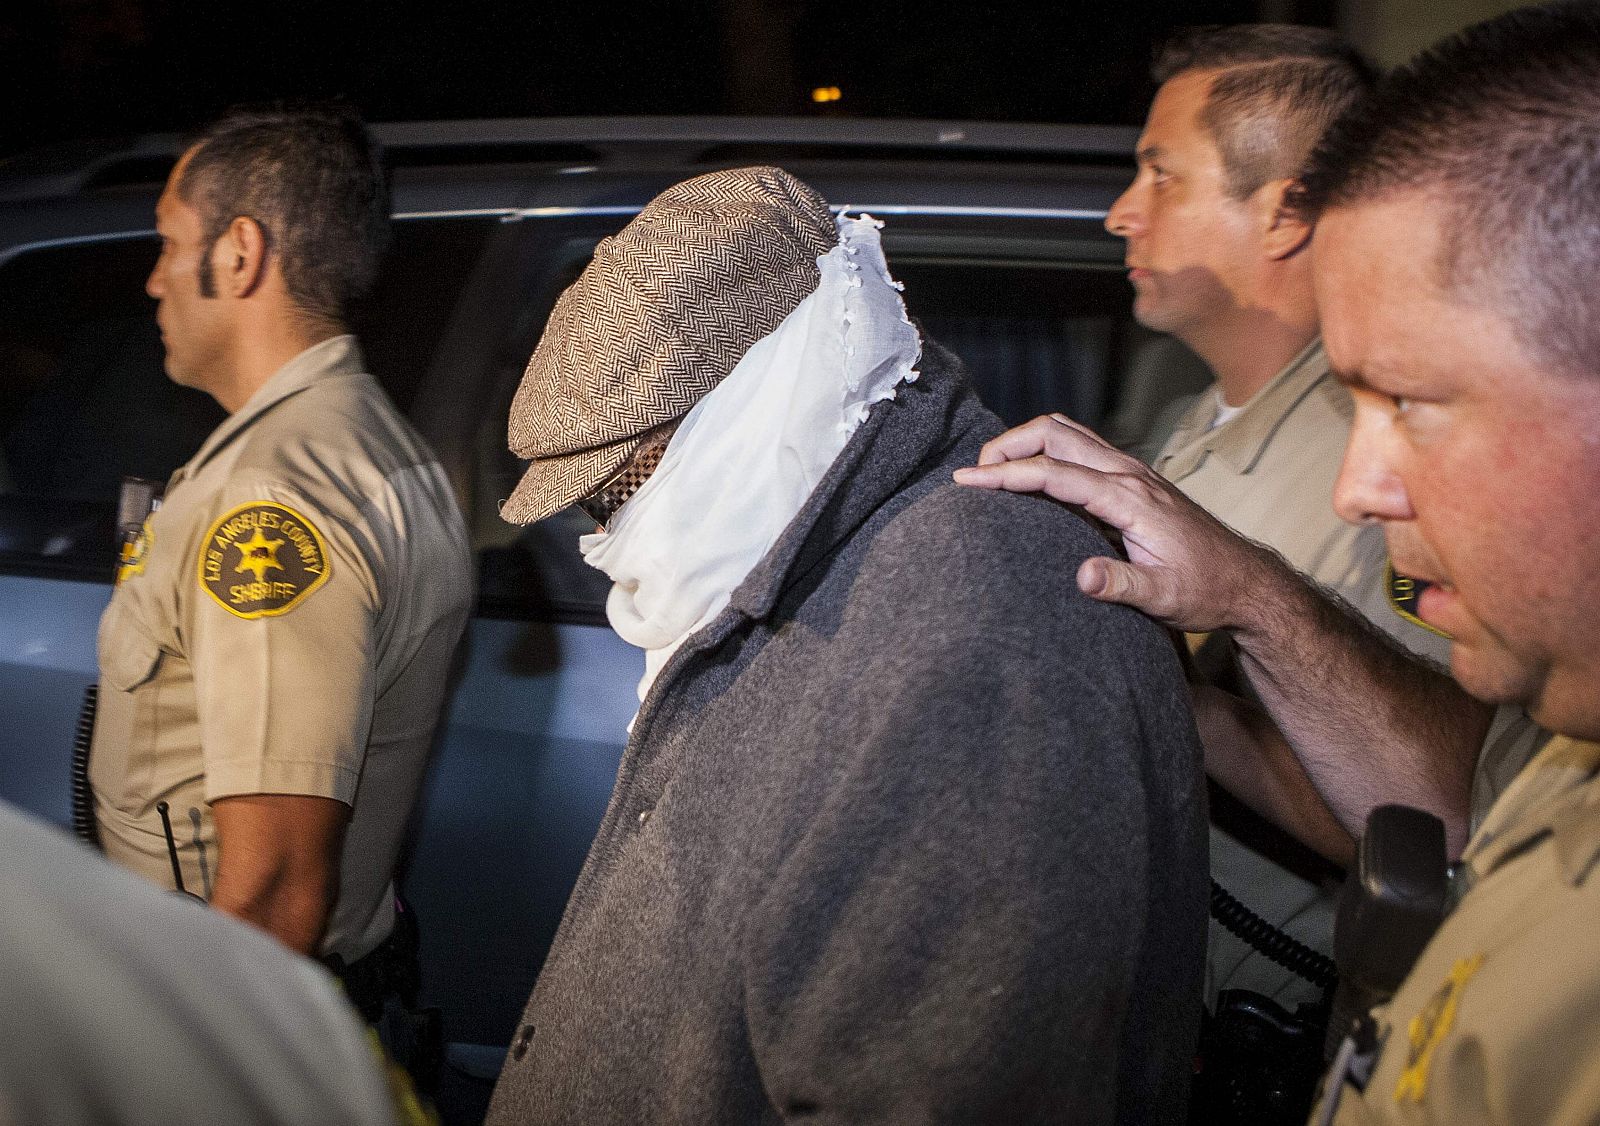 Nakoula Basseley Nakoula is escorted out of his home by Los Angeles County Sheriff's officers in Cerritos, California